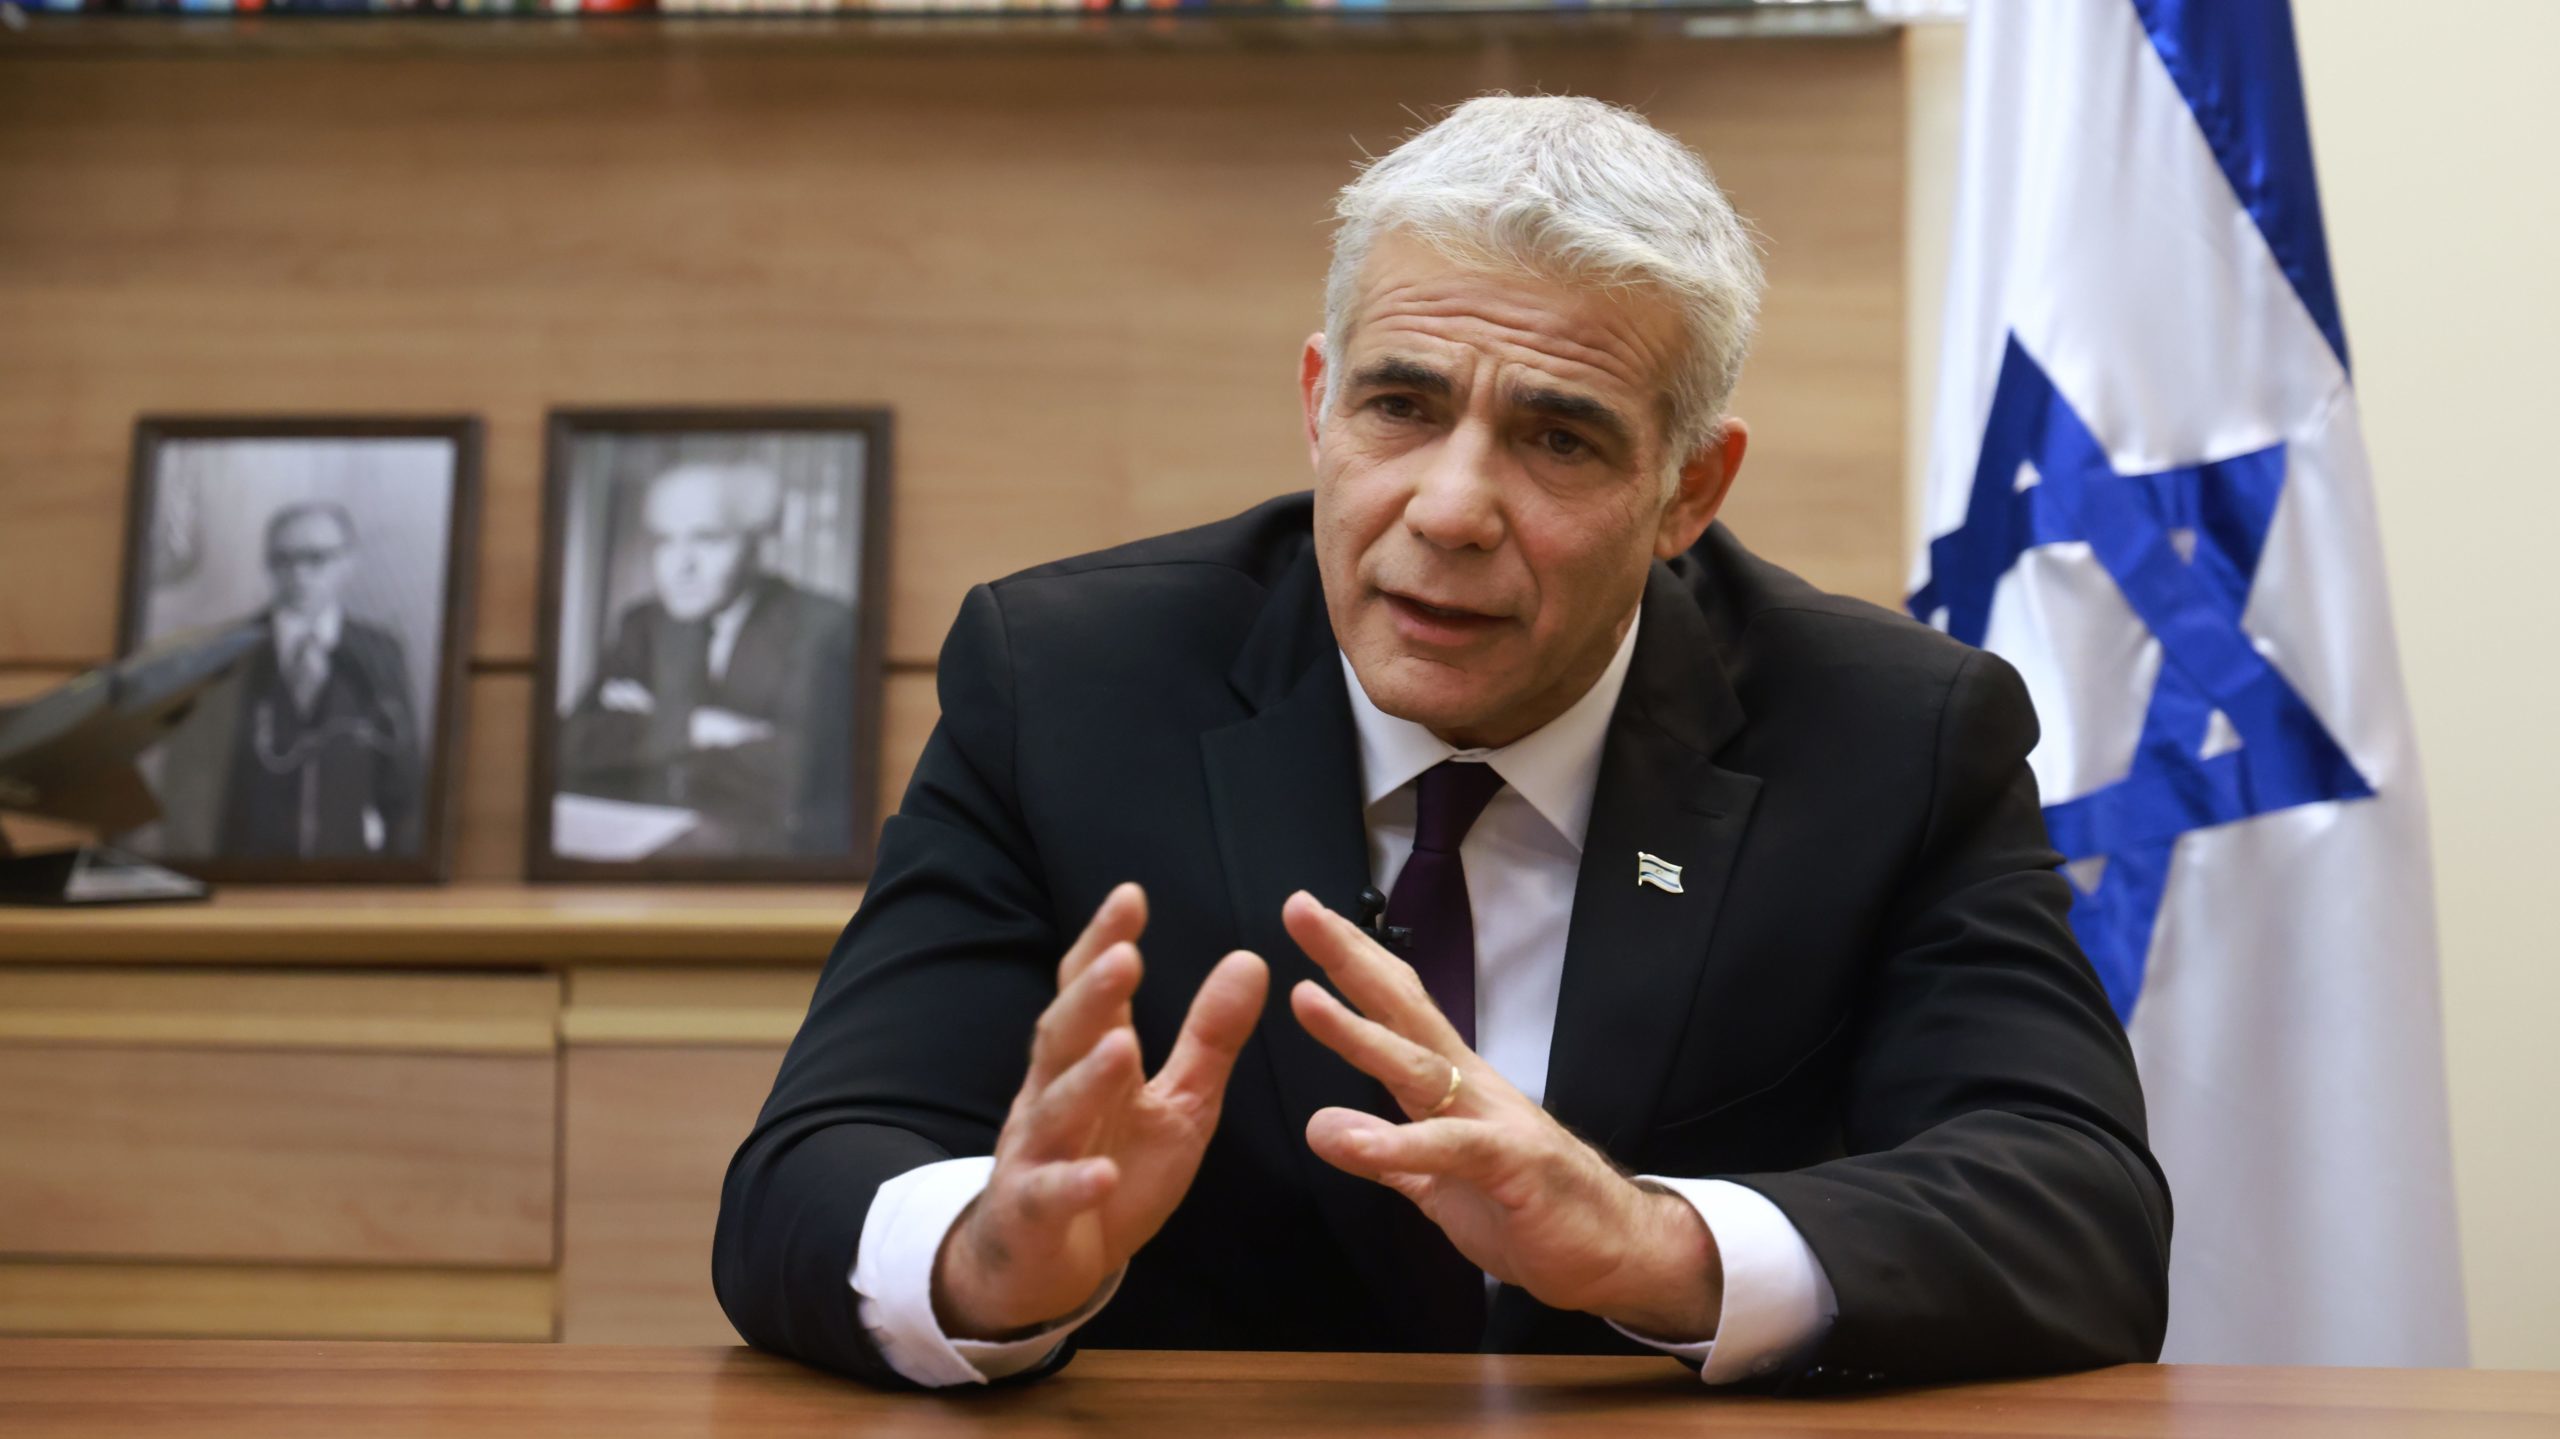 Israel’s Opposition Leader Fails to Get Knesset Backing for No-Confidence Motion